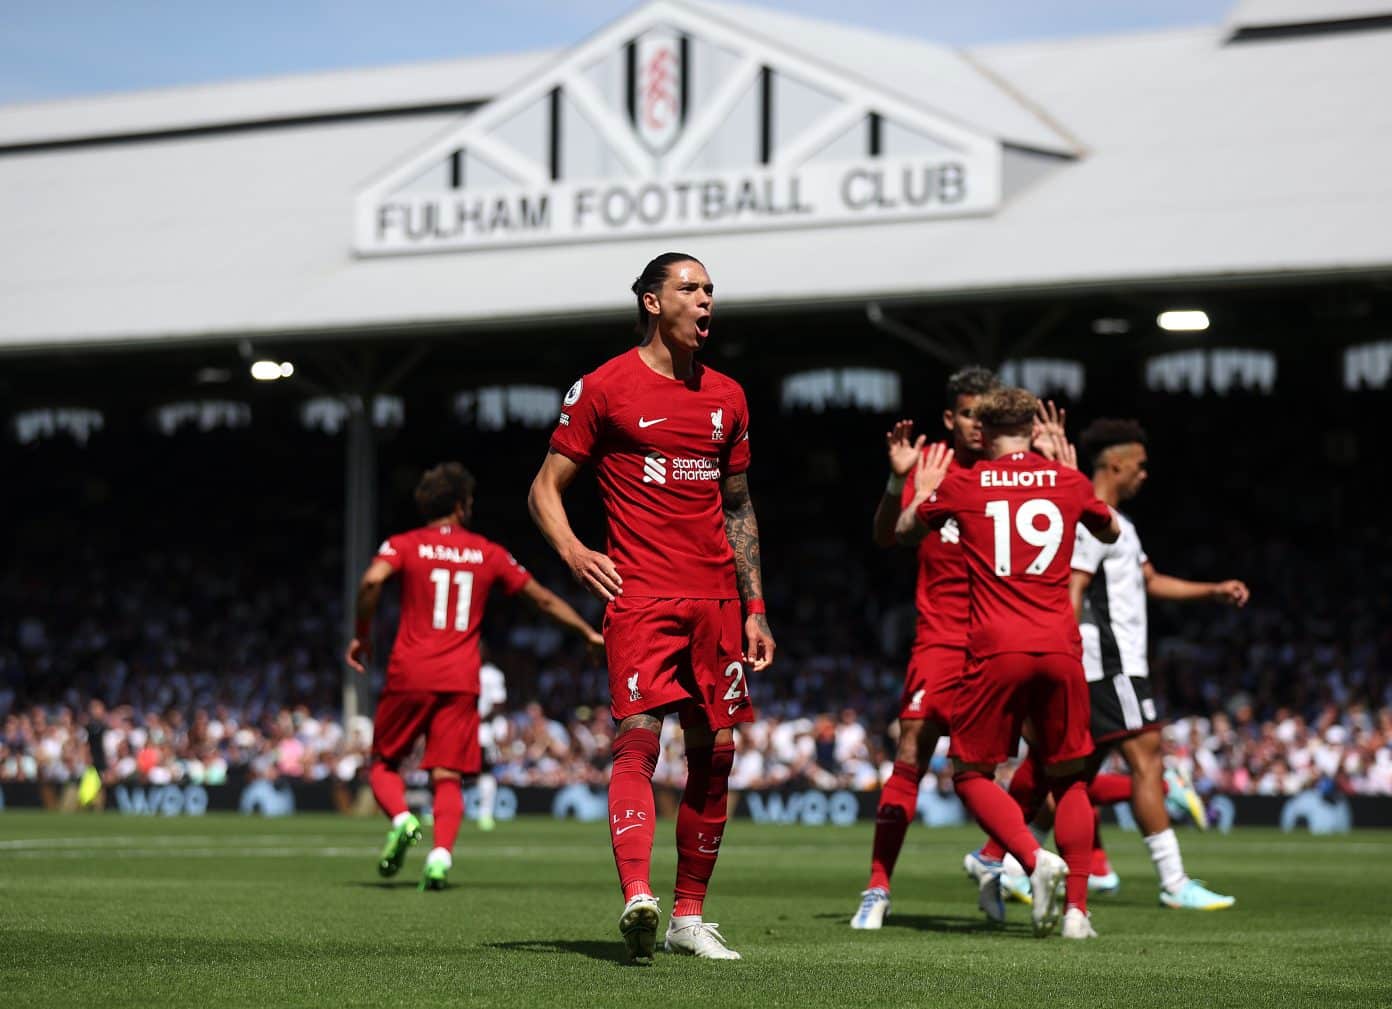 Fulham 2 - Liverpool - Watch the goals and highlights - LFC Globe